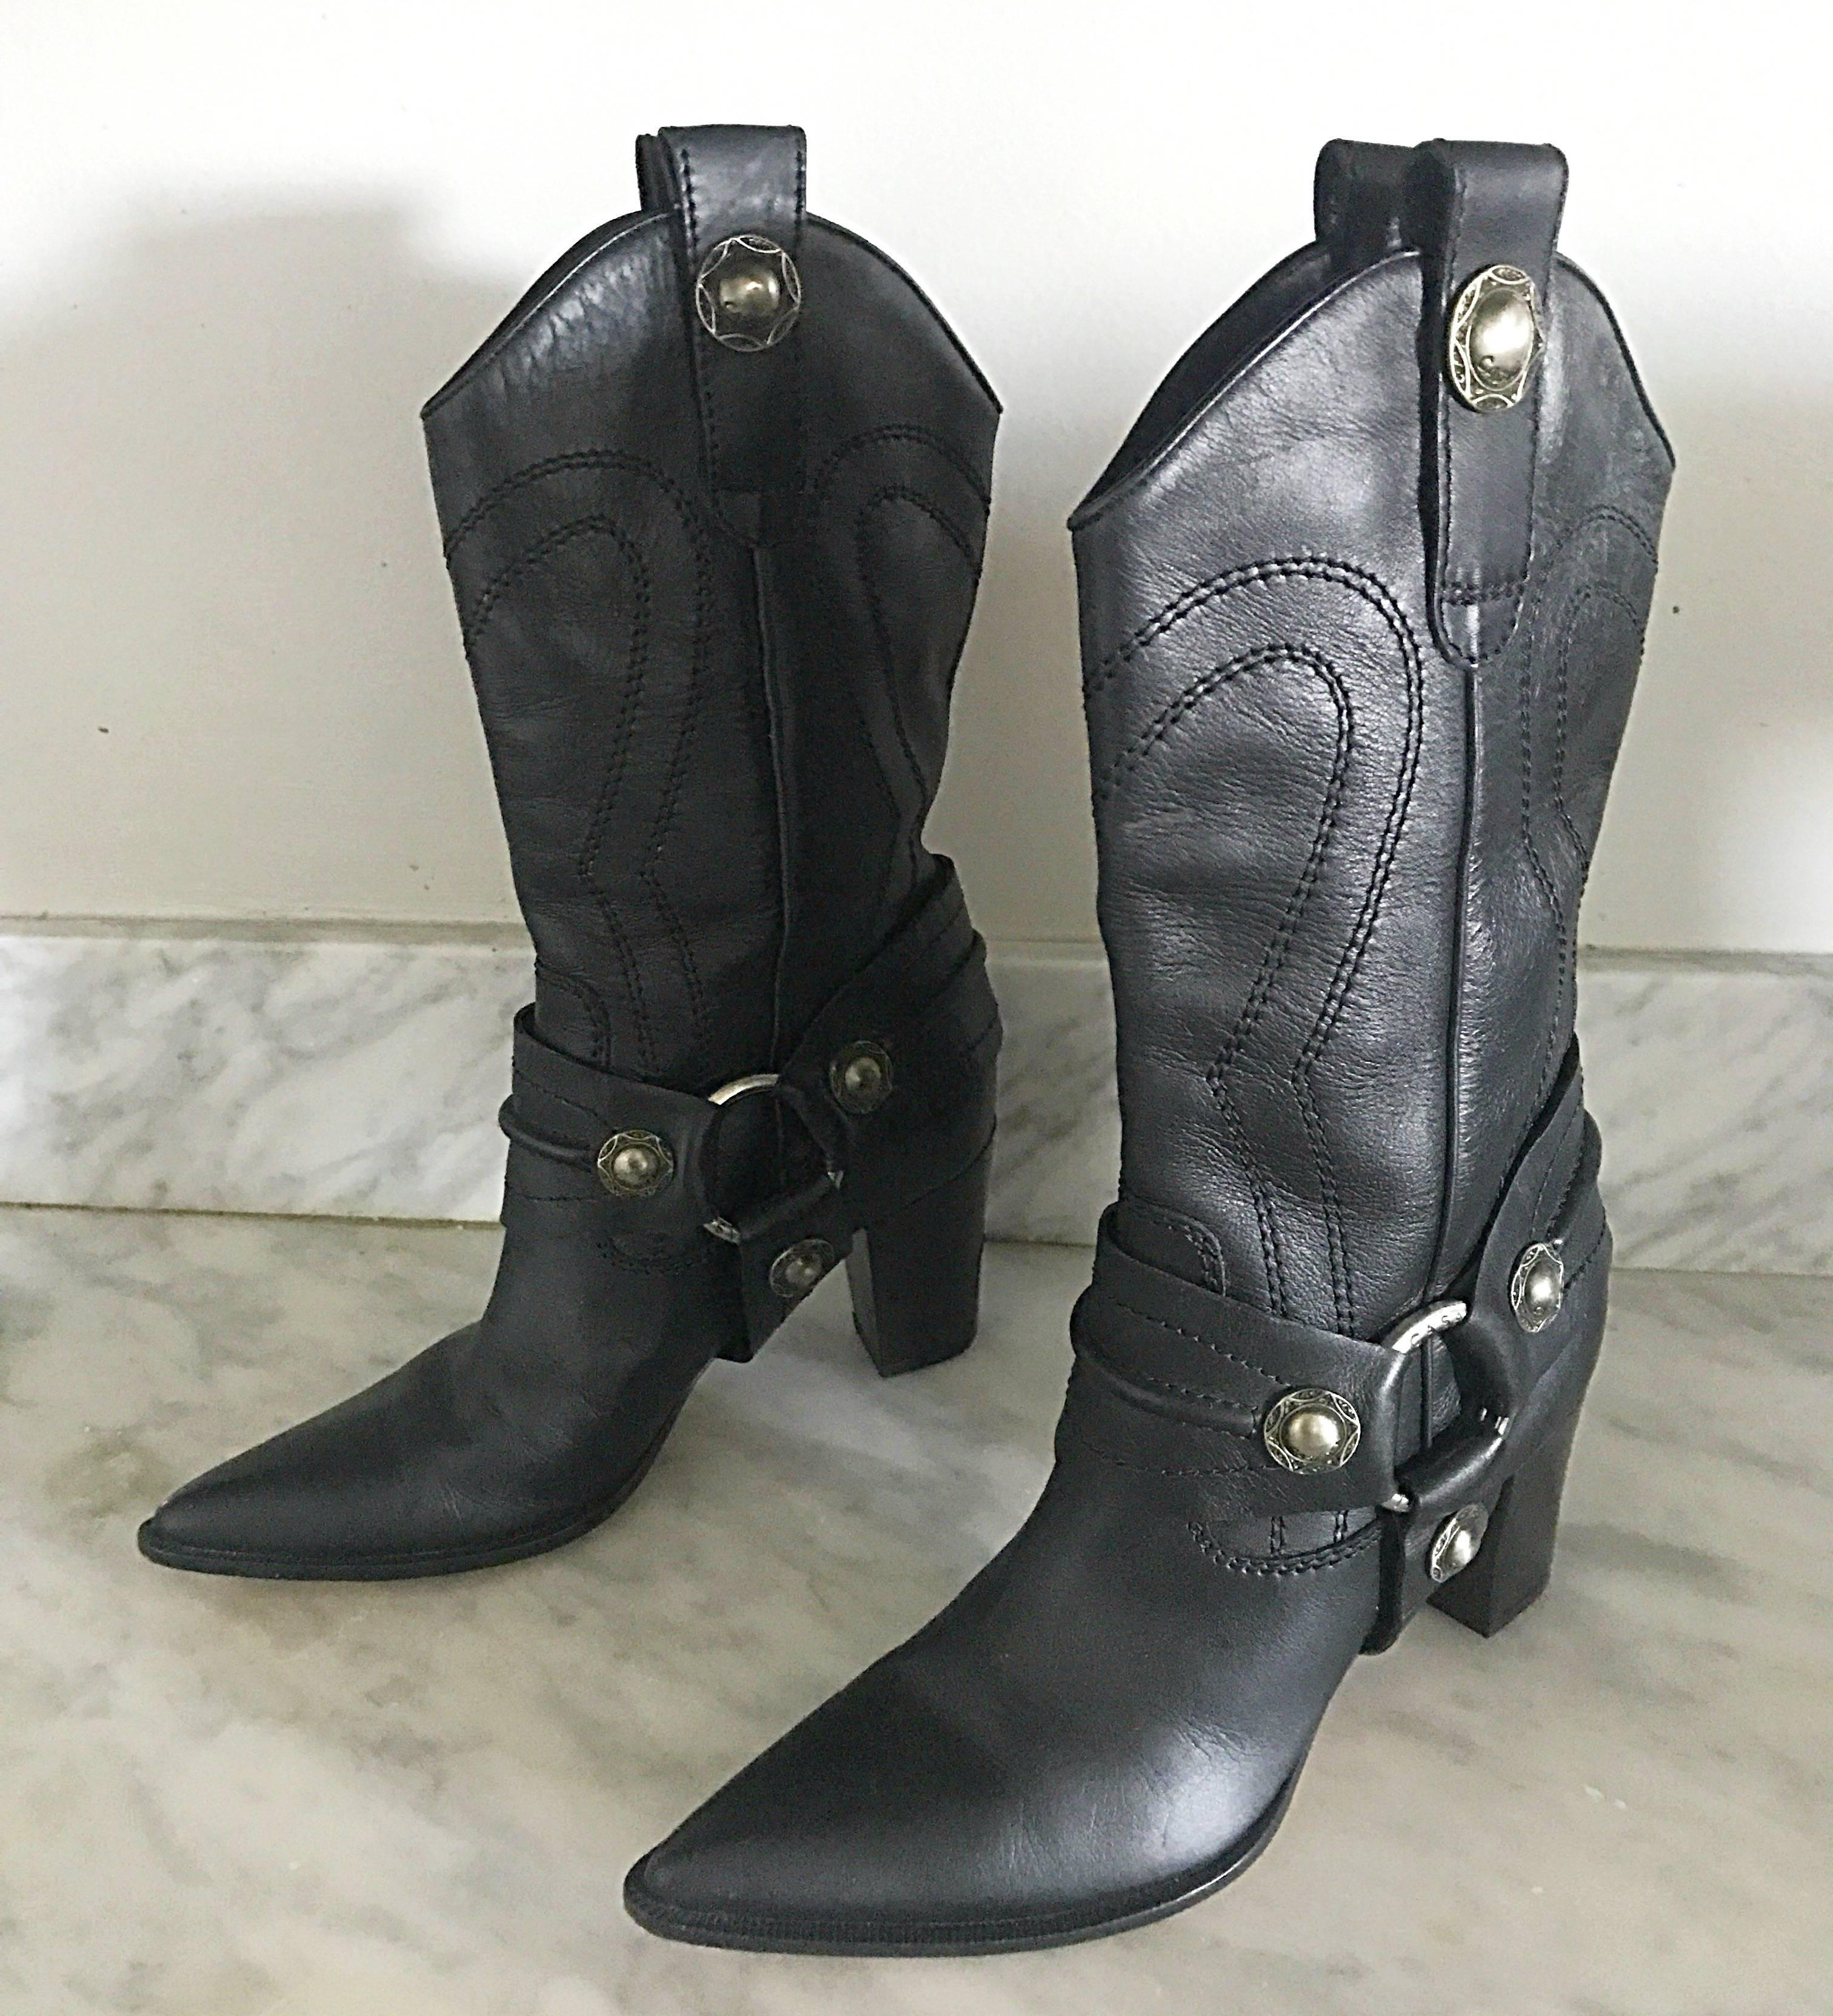 New and sold out CASADEI black leather western inspired high heeled cowboy boots! Features intricate silver hardware, and black embroidery throughout. Hits mid-calf, and can easily be worn with jeans, shorts, a skirt, or a dress. Super comfortable,